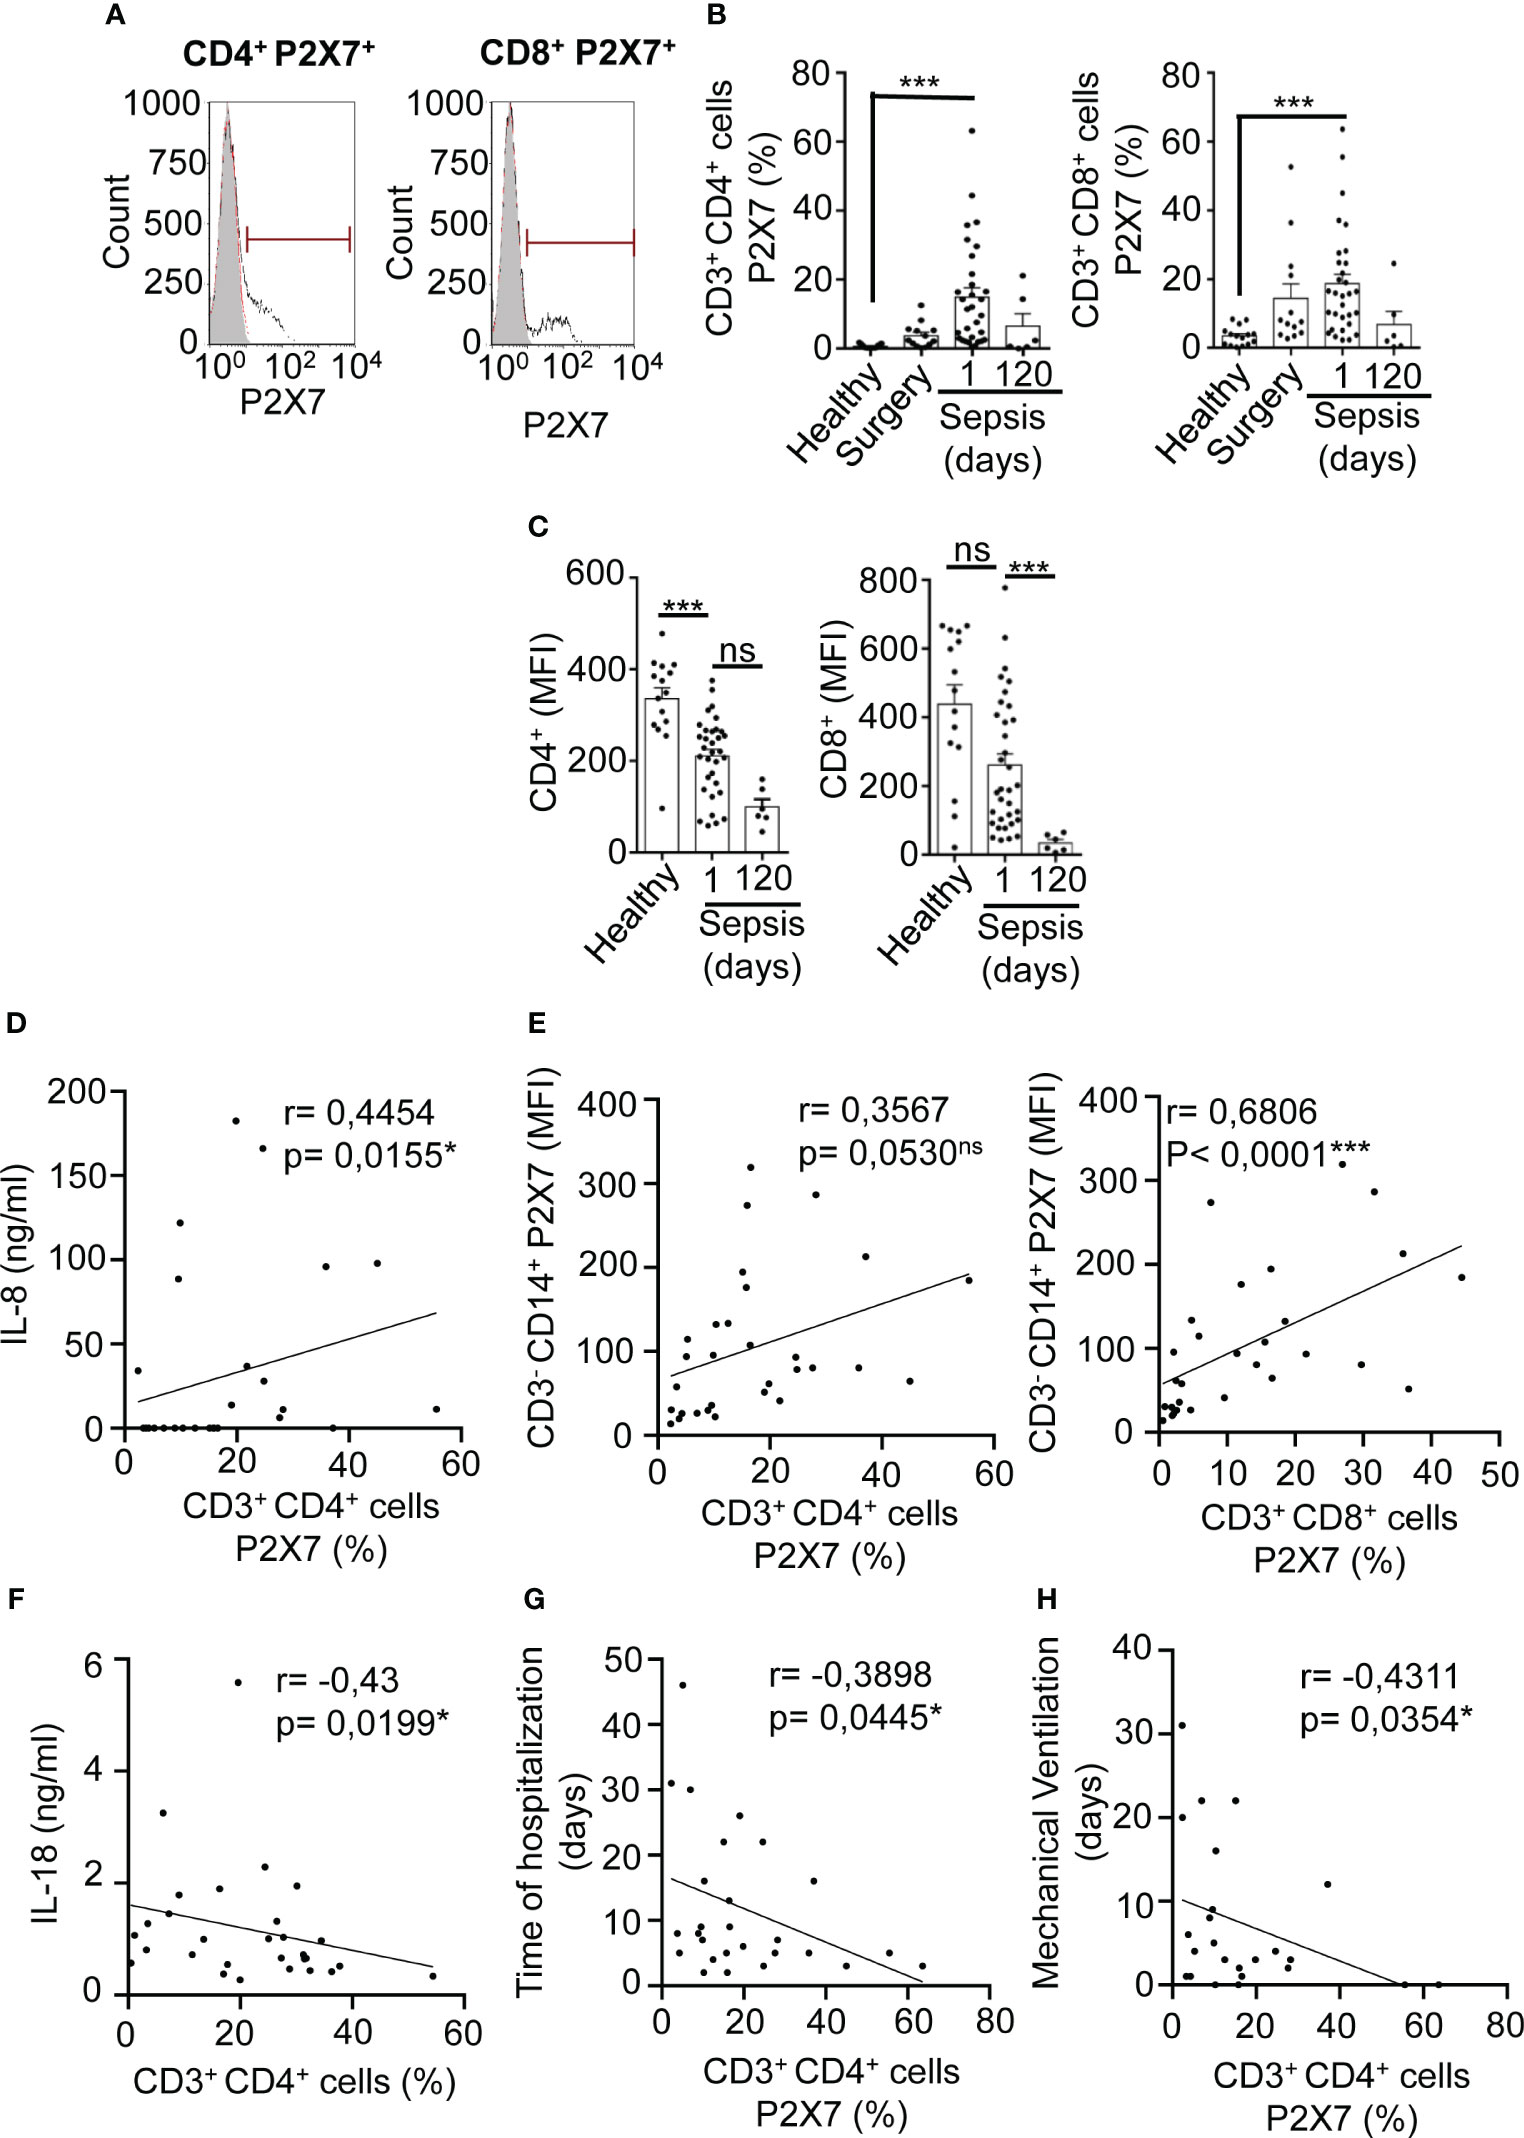 Frontiers | Purinergic P2X7 receptor expression increases in 